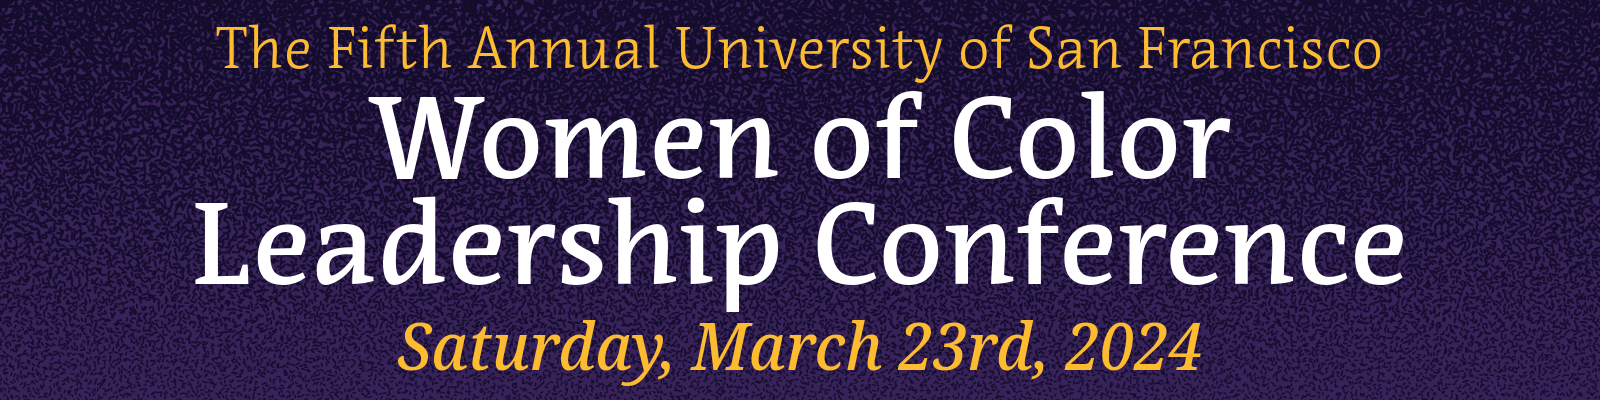 Women of Color Leadership Conference Saturday, March 23rd, 2024